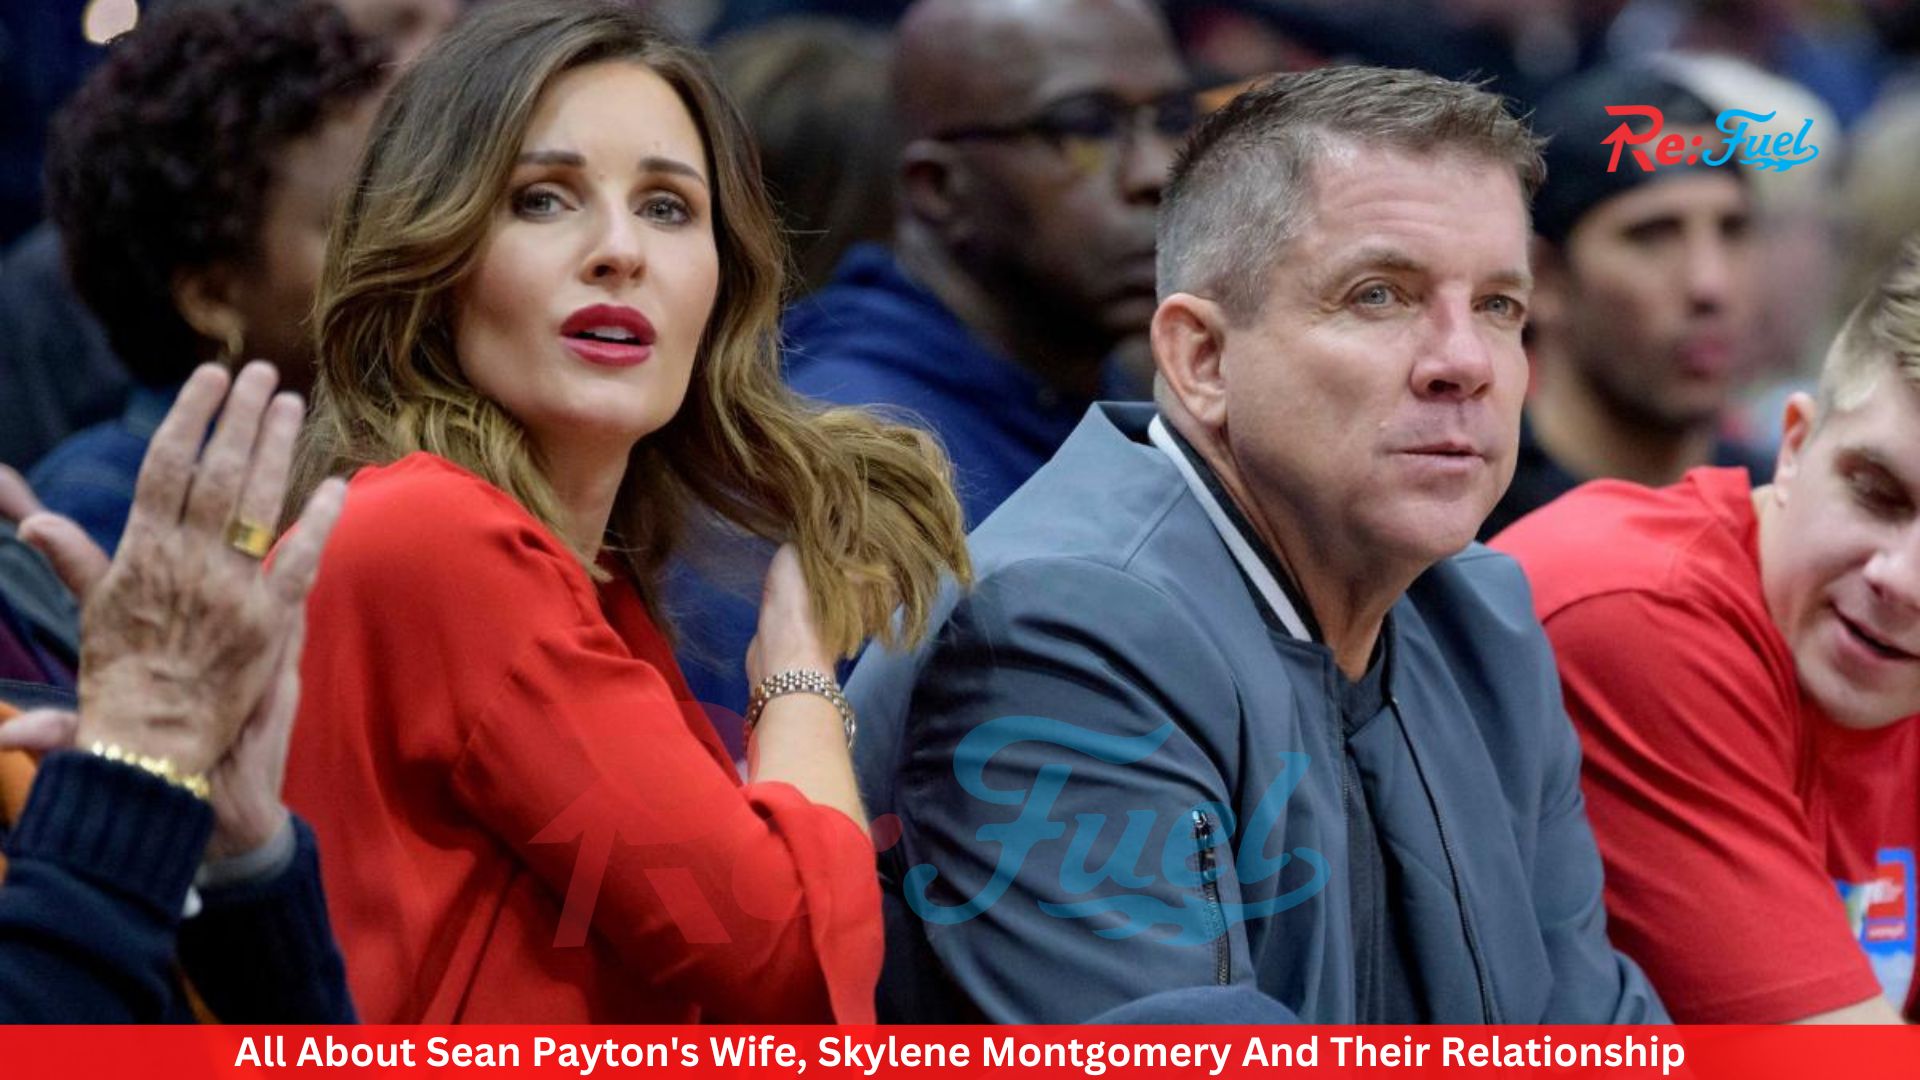 All About Sean Payton's Wife, Skylene Montgomery And Their Relationship